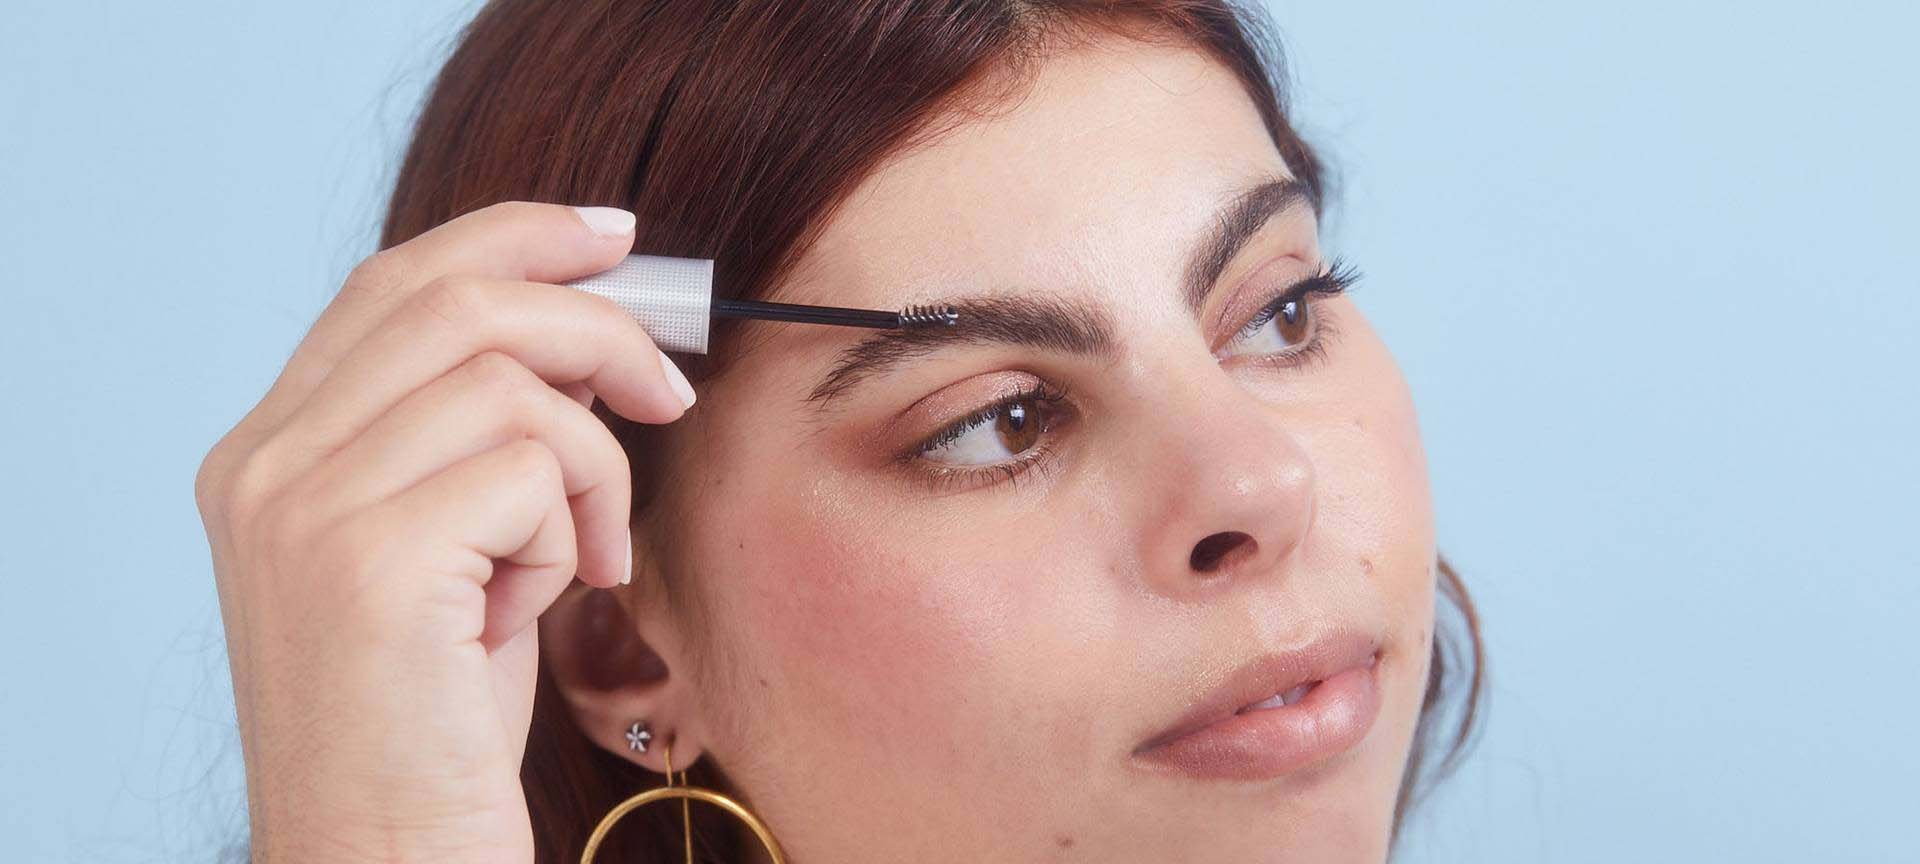 How to Get Thick, Arched Eyebrows - L'Oréal Paris